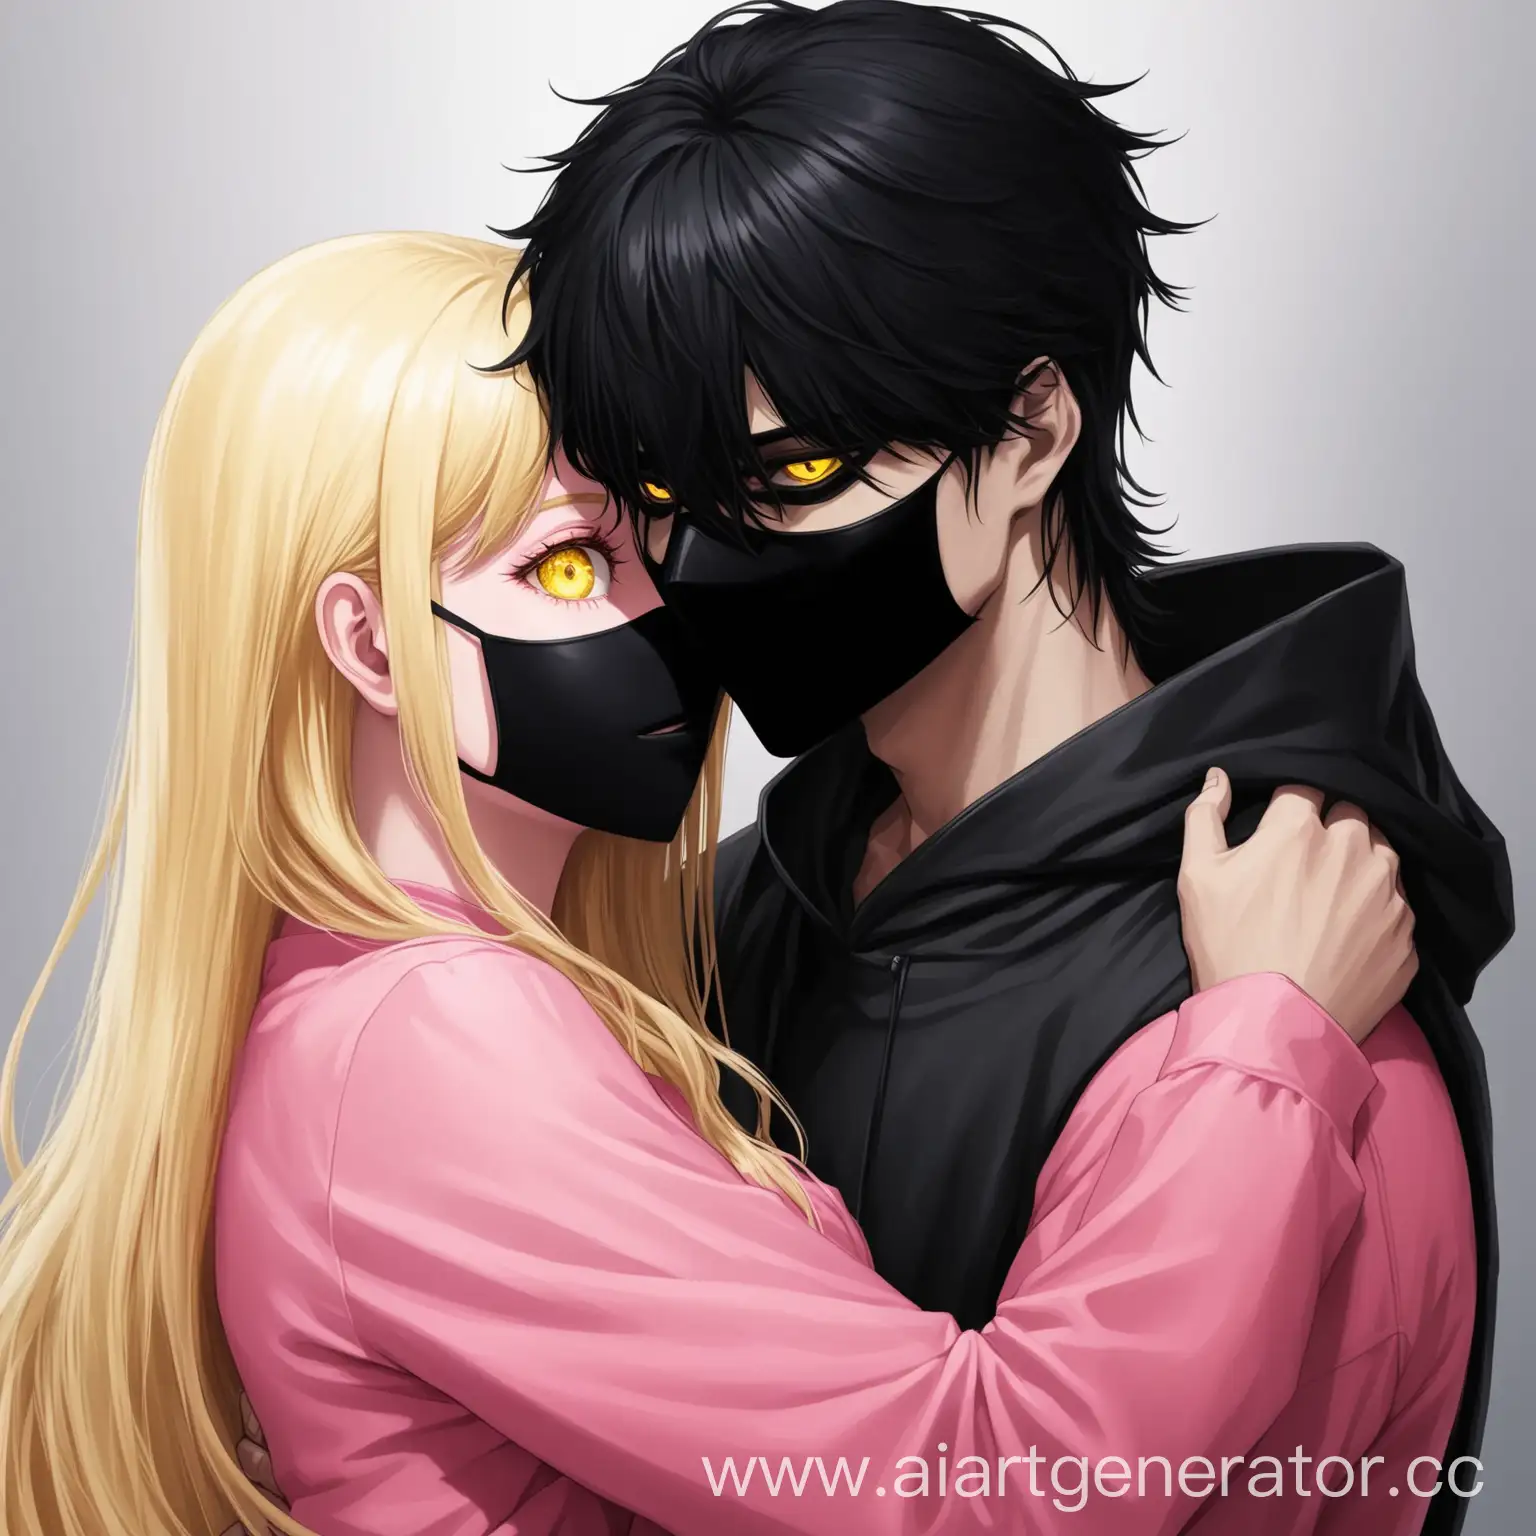 Childrens-Fantasy-Boy-with-Long-Black-Hair-Embraces-Blonde-Girl-in-Pink-Clothes